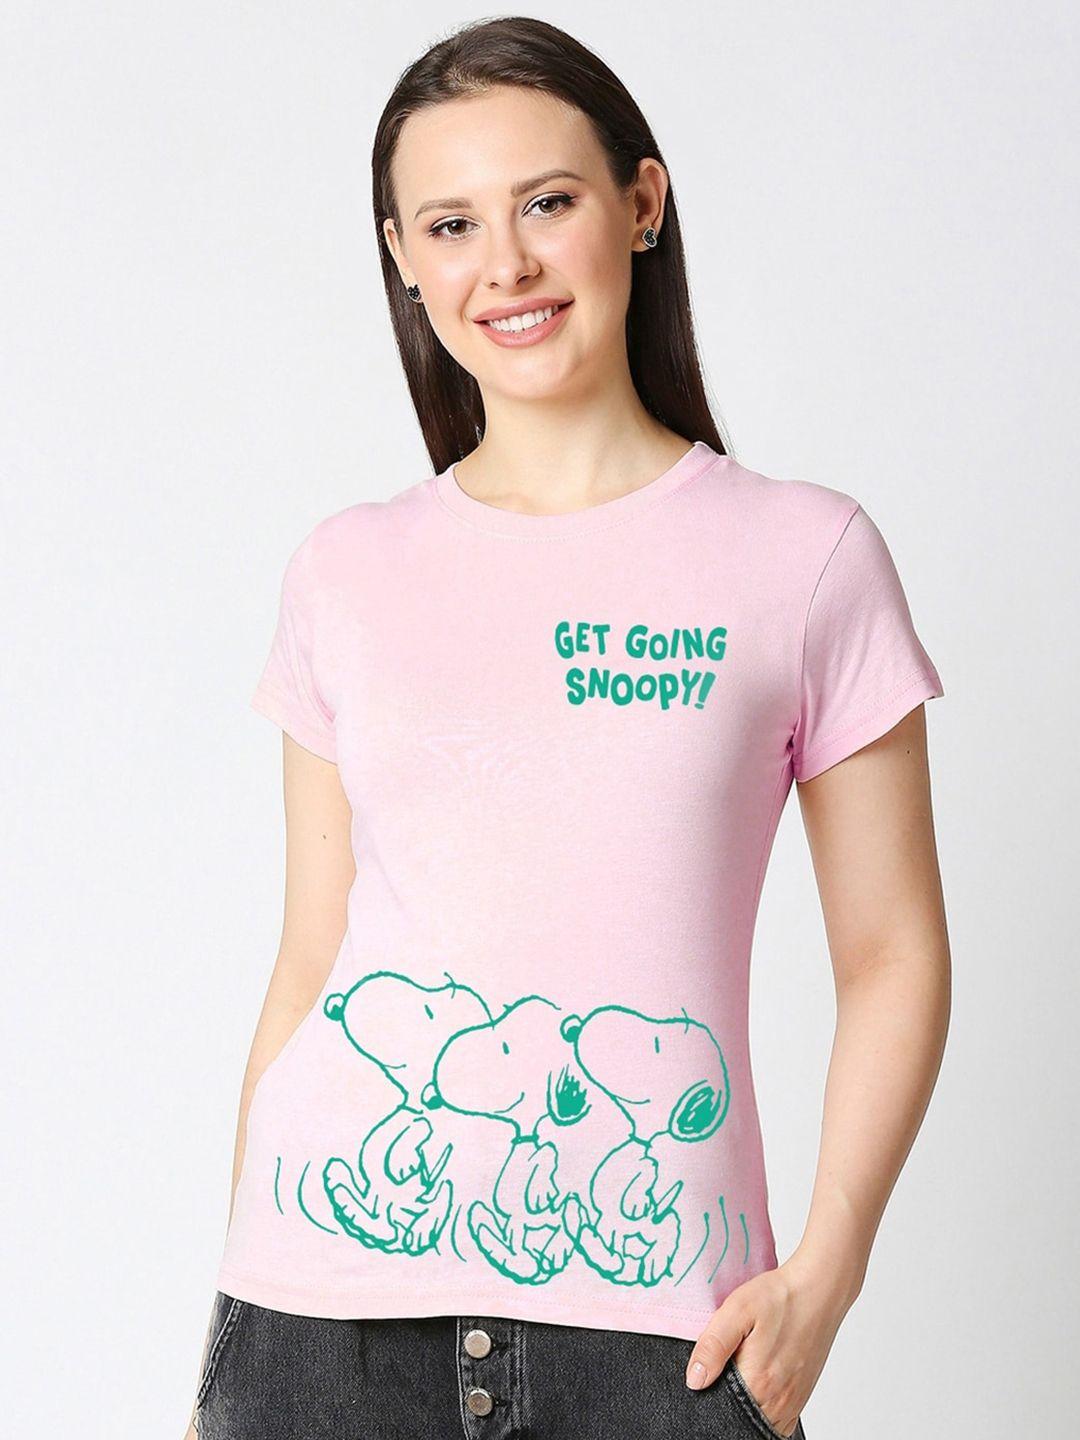 bewakoof-get-going-snoopy-graphic-&-typography-printed-t-shirt